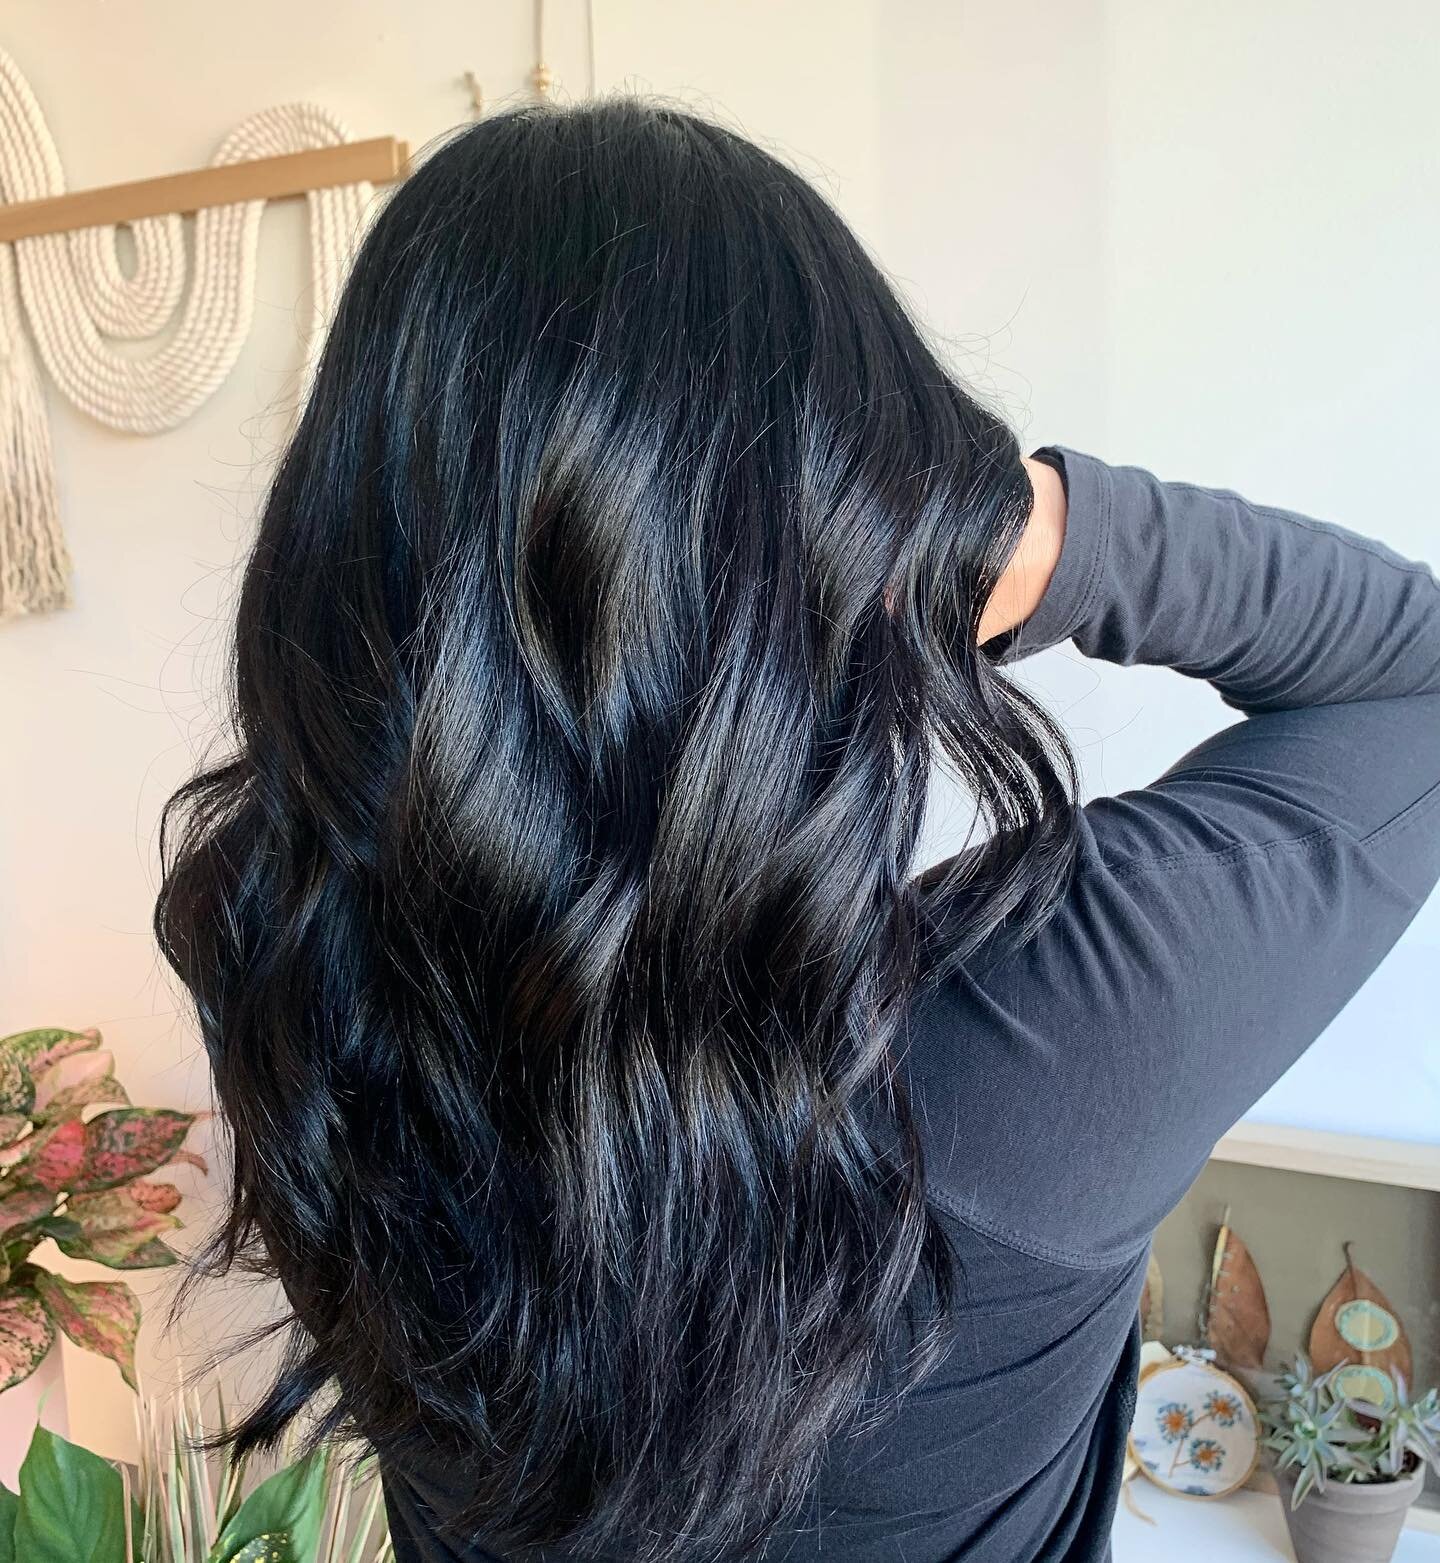 Lots of brunettes lately! Depth and shine with @owayorganics .  Beautiful hair and an even more beautiful person @fitnut4u ❤️ #libertyvillesalon #brunette #shinyhair #hairoftheday #healthyhair